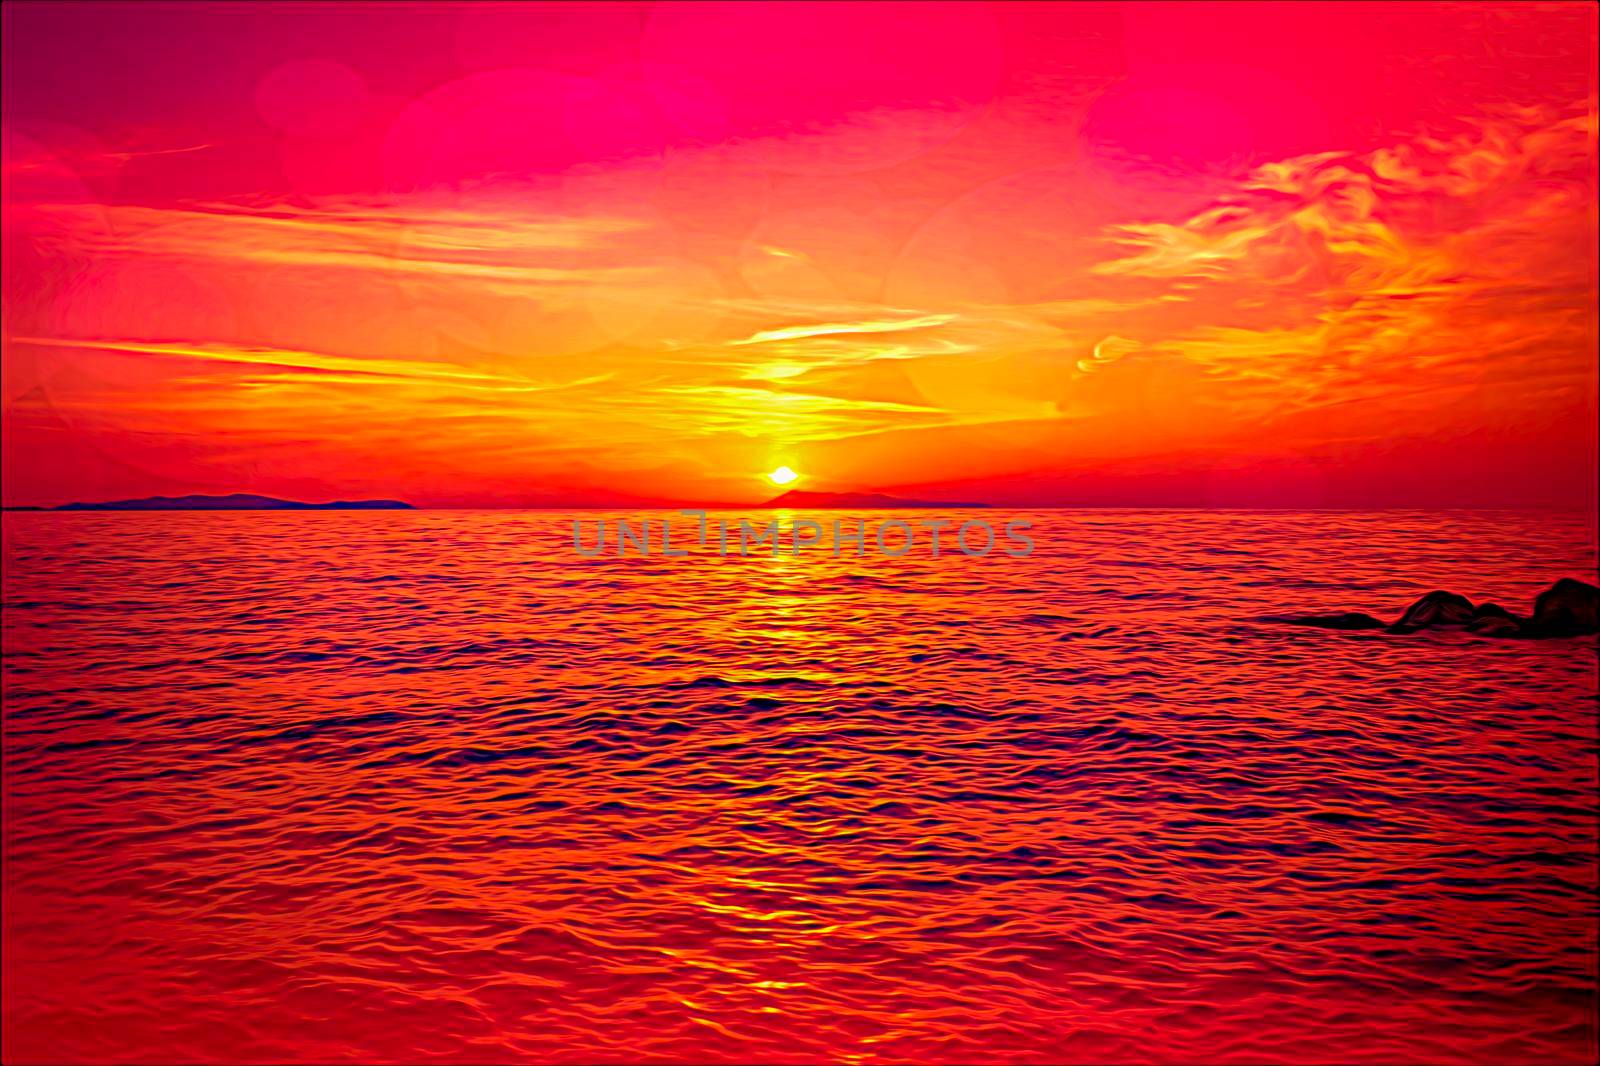 Dreamy sunset at Logas beach at Peroulades village of Corfu island, Greece. Digital paint.